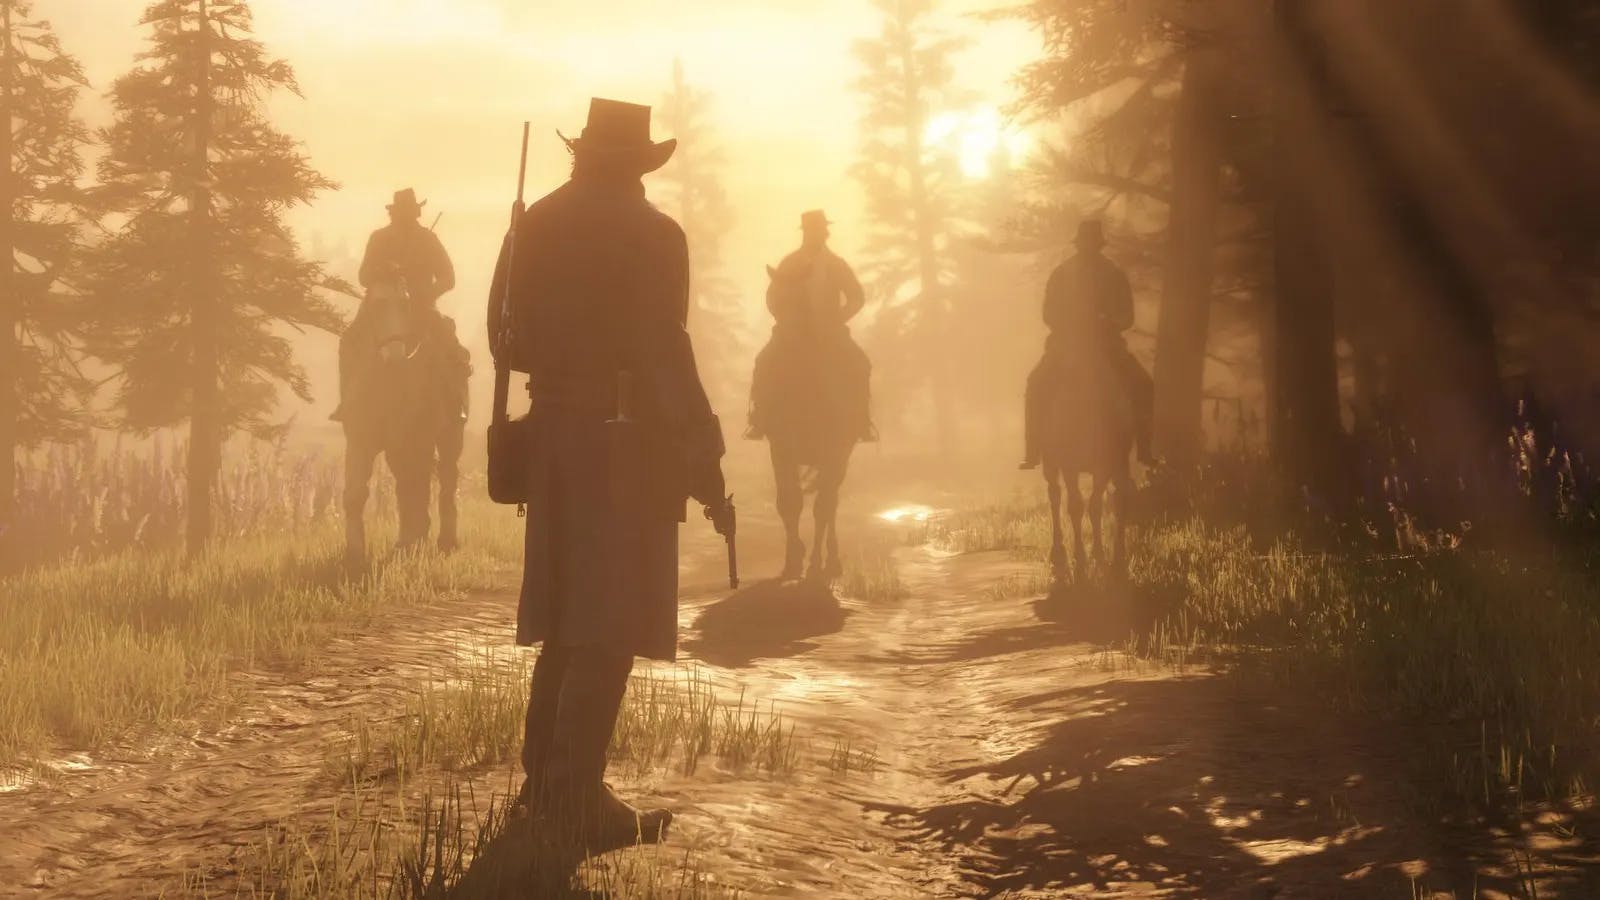 Red Dead Redemption 3's release date is yet to be confirmed but could be anywhere between 2026 and 2030. 